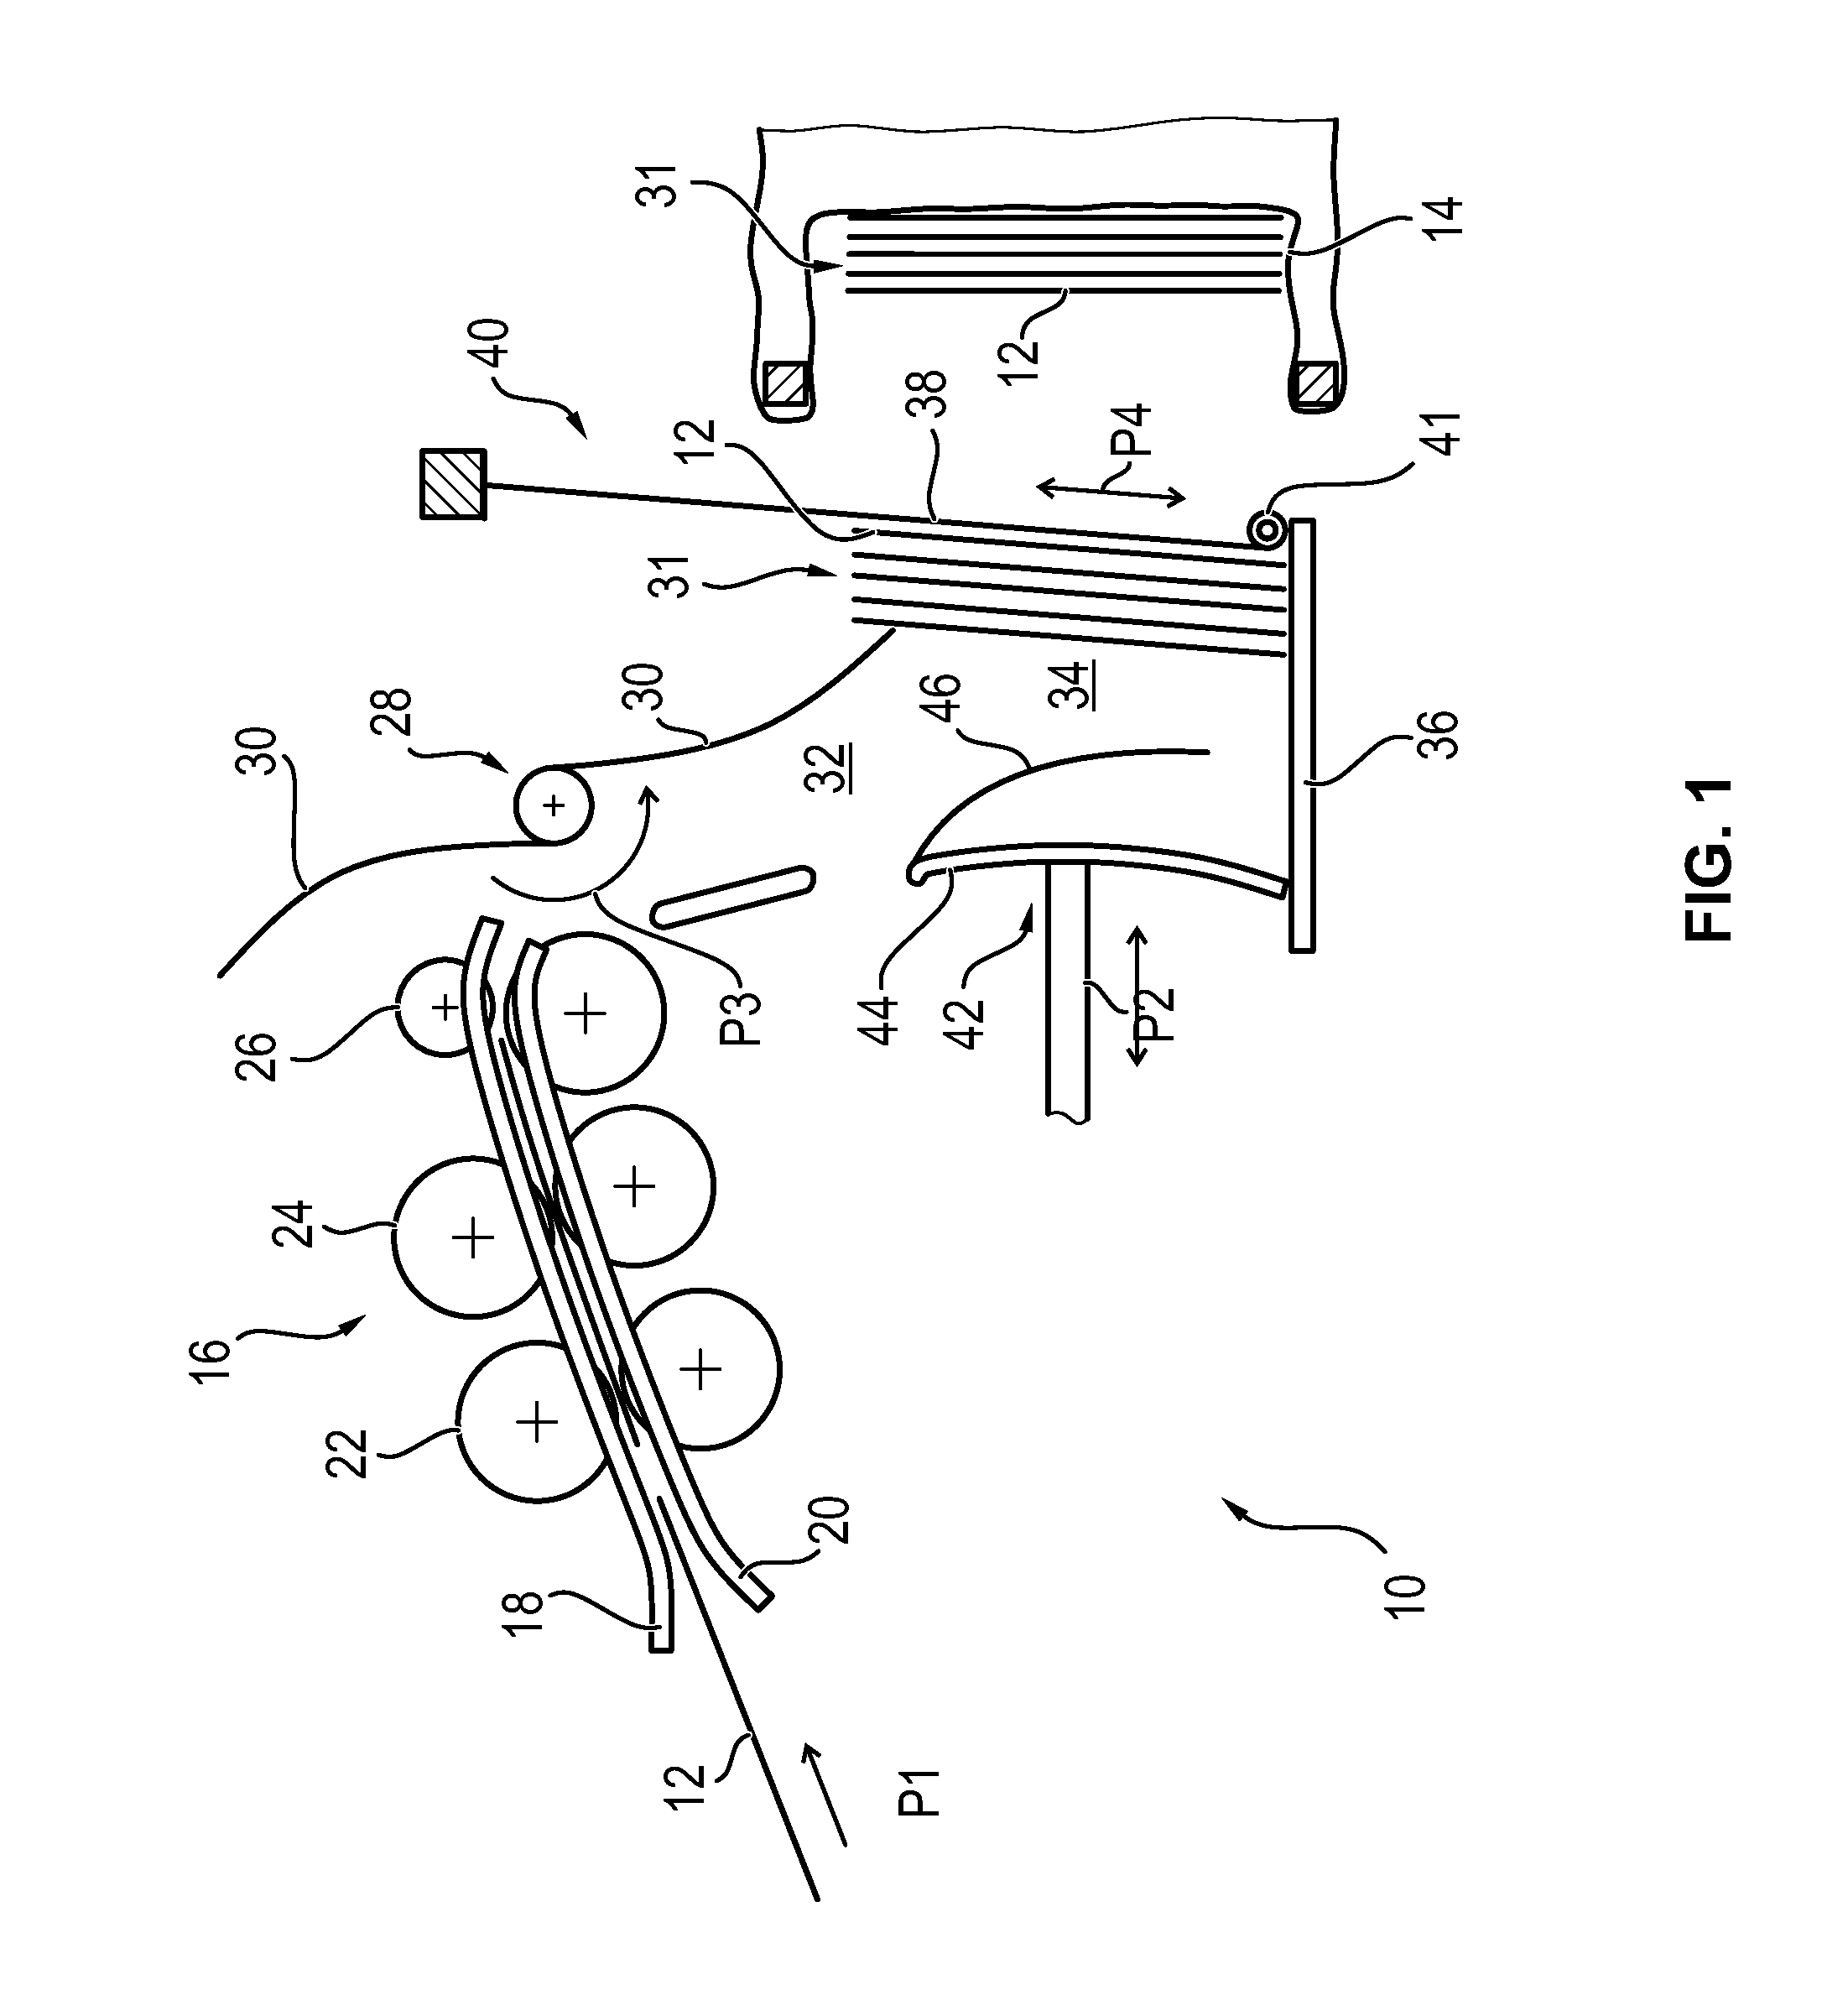 Device and method for filling a flexible transport container with notes of value